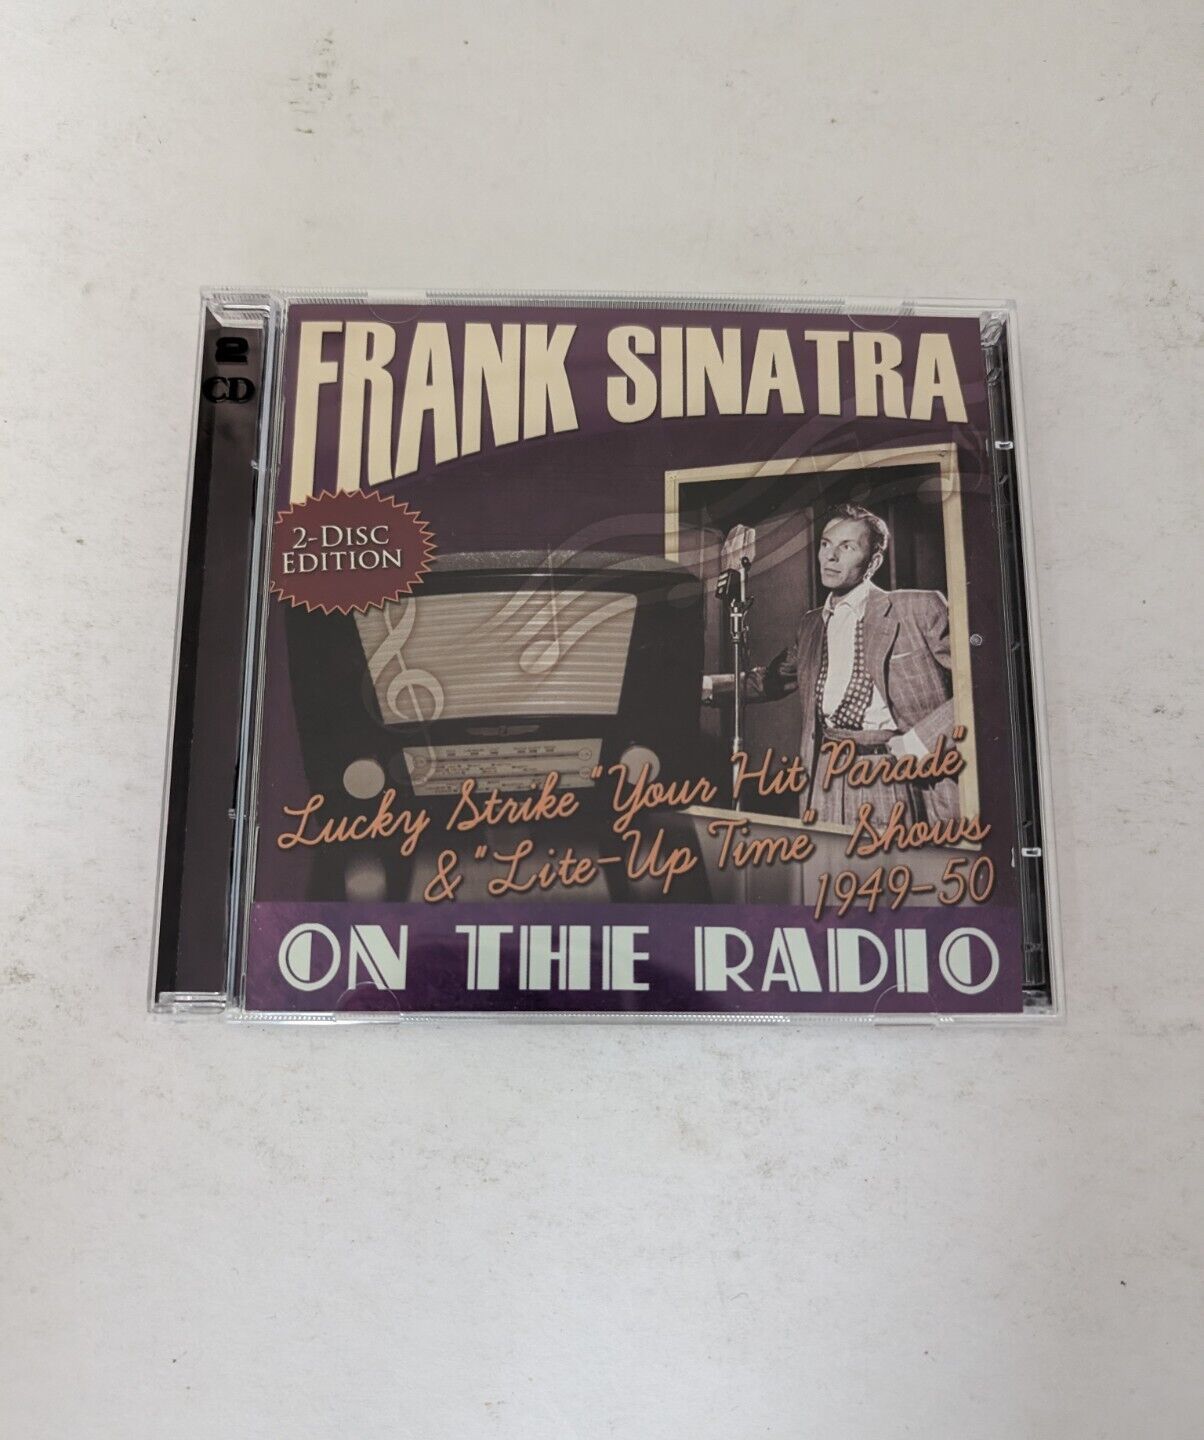 Frank Sinatra On the Radio Lucky Strike Lite-Up Time Shows 1949-50 2 Disc CD UK